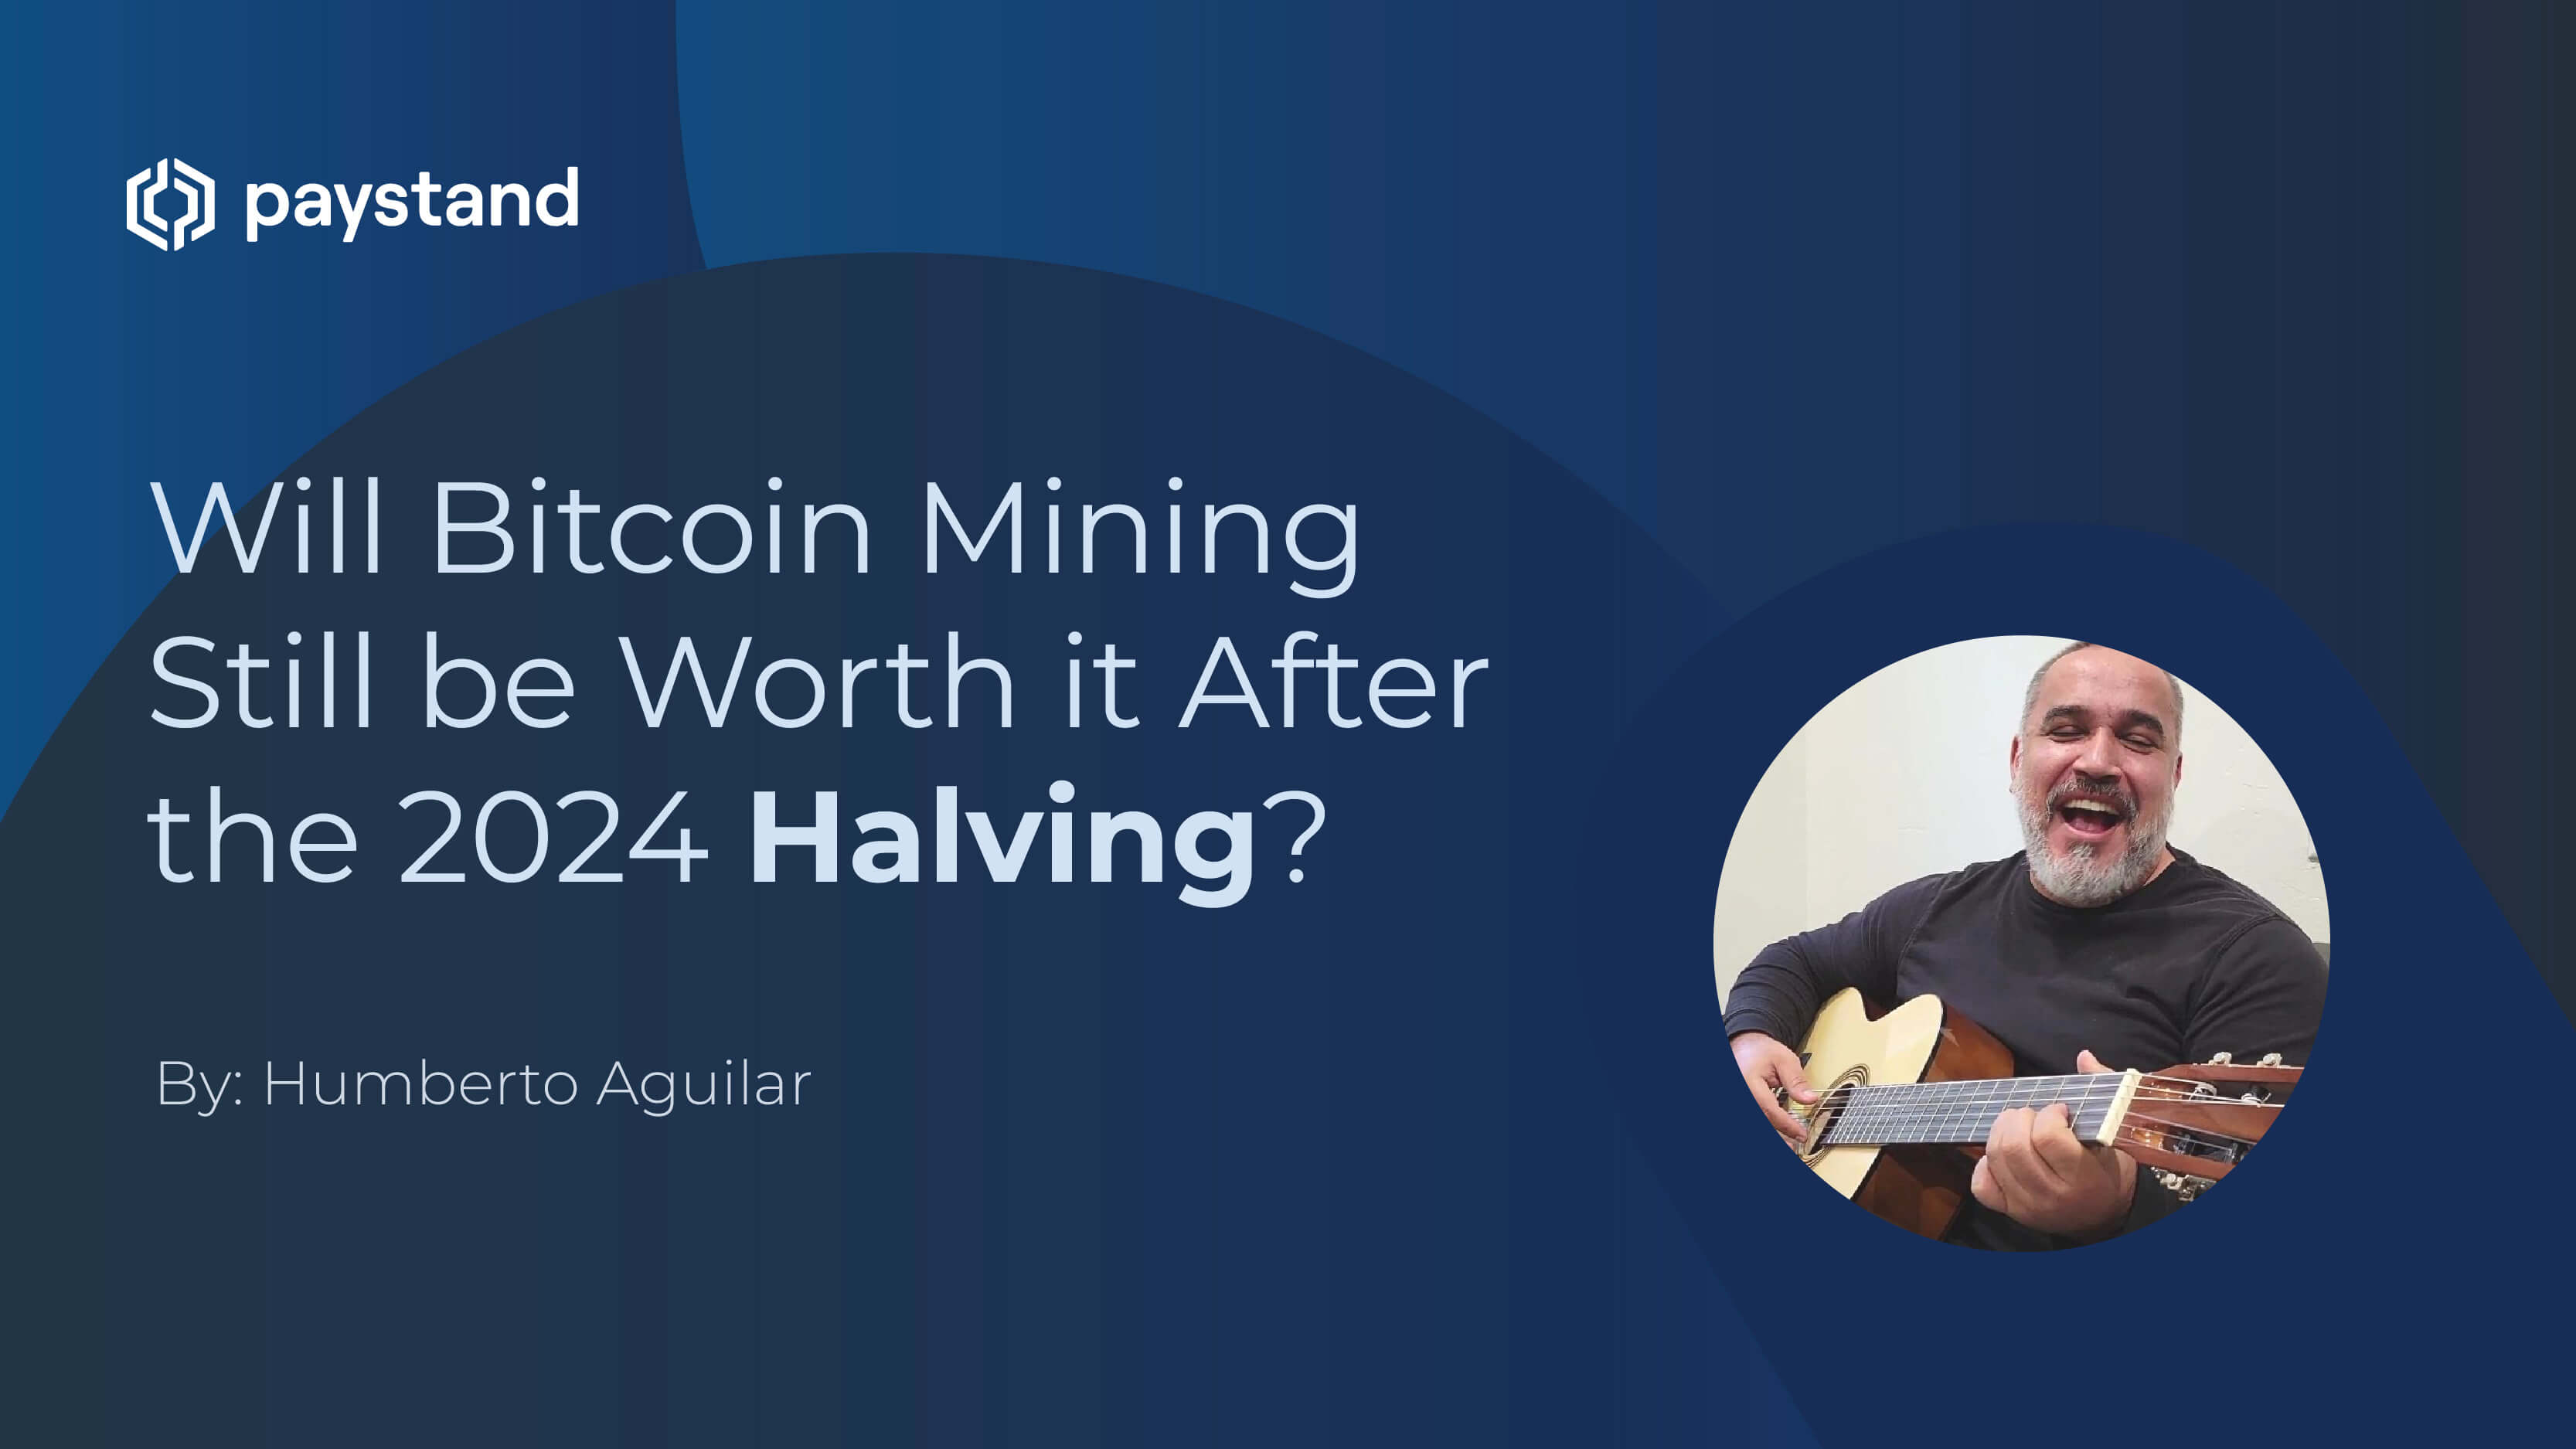 Will Bitcoin Mining Still Be Worth It After The 2024 Halving?